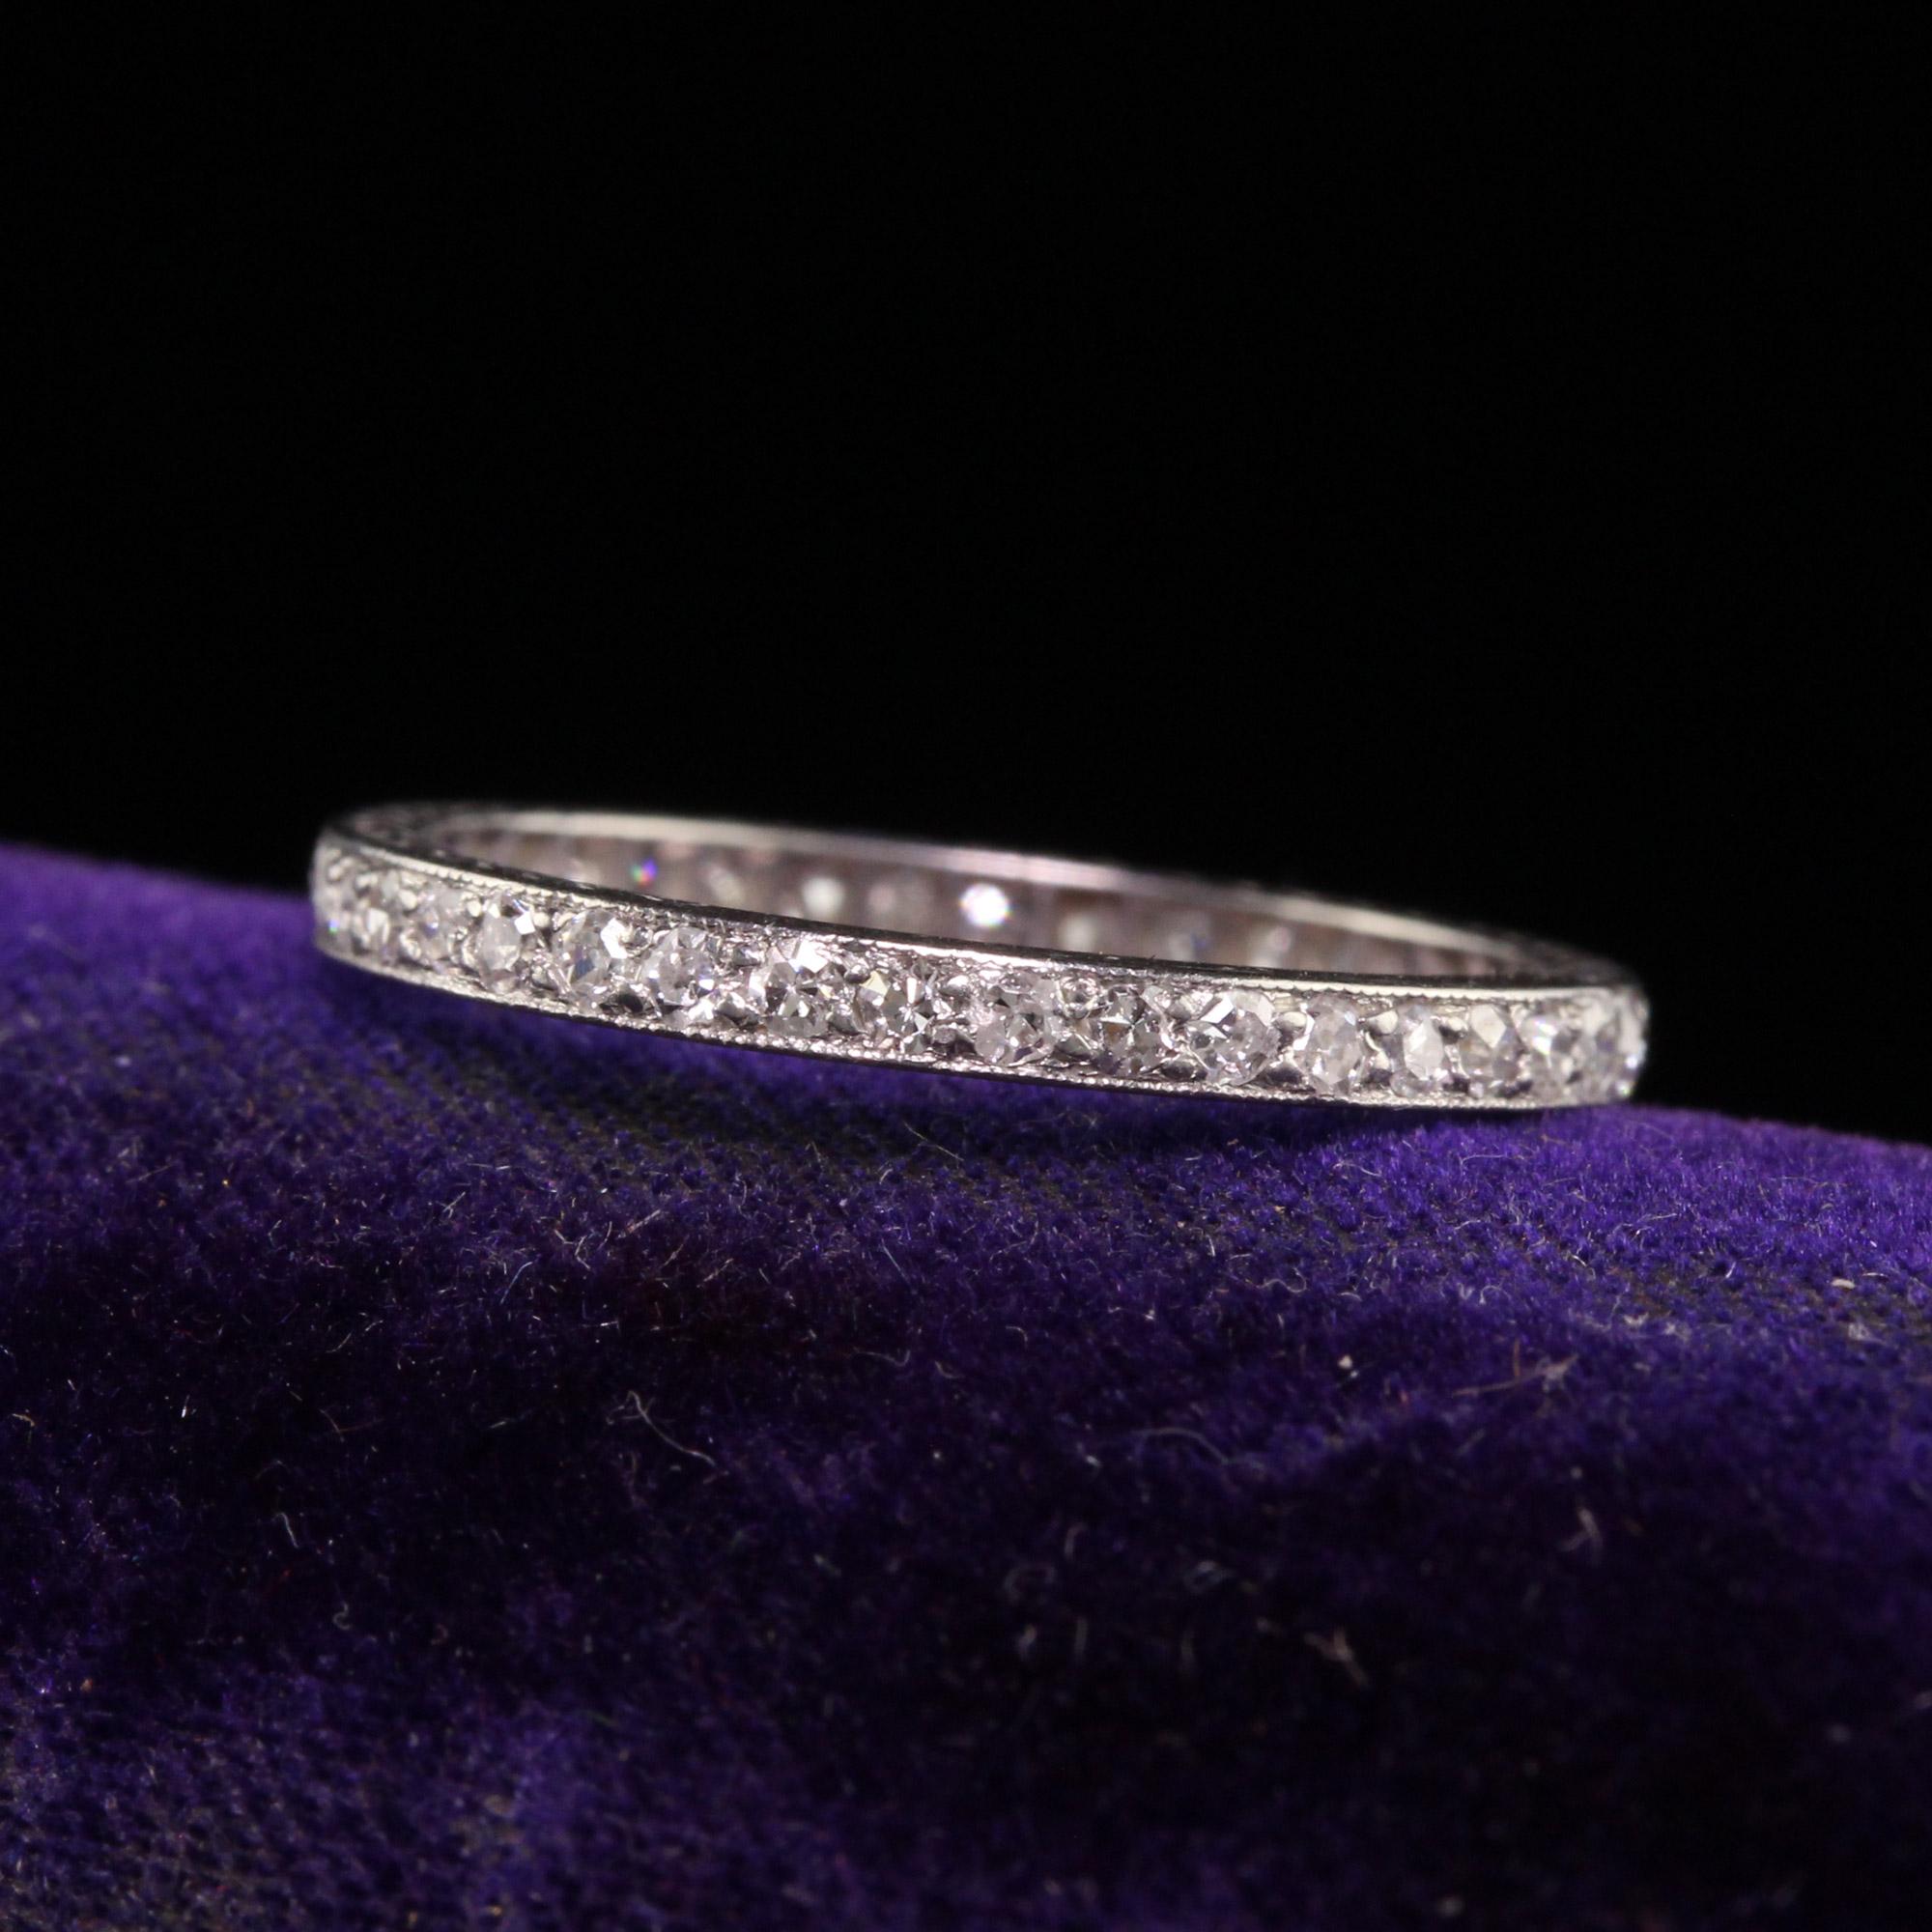 Beautiful Antique Art Deco Platinum Single Cut Diamond Engraved Eternity Band - Size 5 1/2. This gorgeous ring is crafted in platinum. It has gorgeous single cut diamonds going around the entire ring and is engraved on the sides. The ring is in good